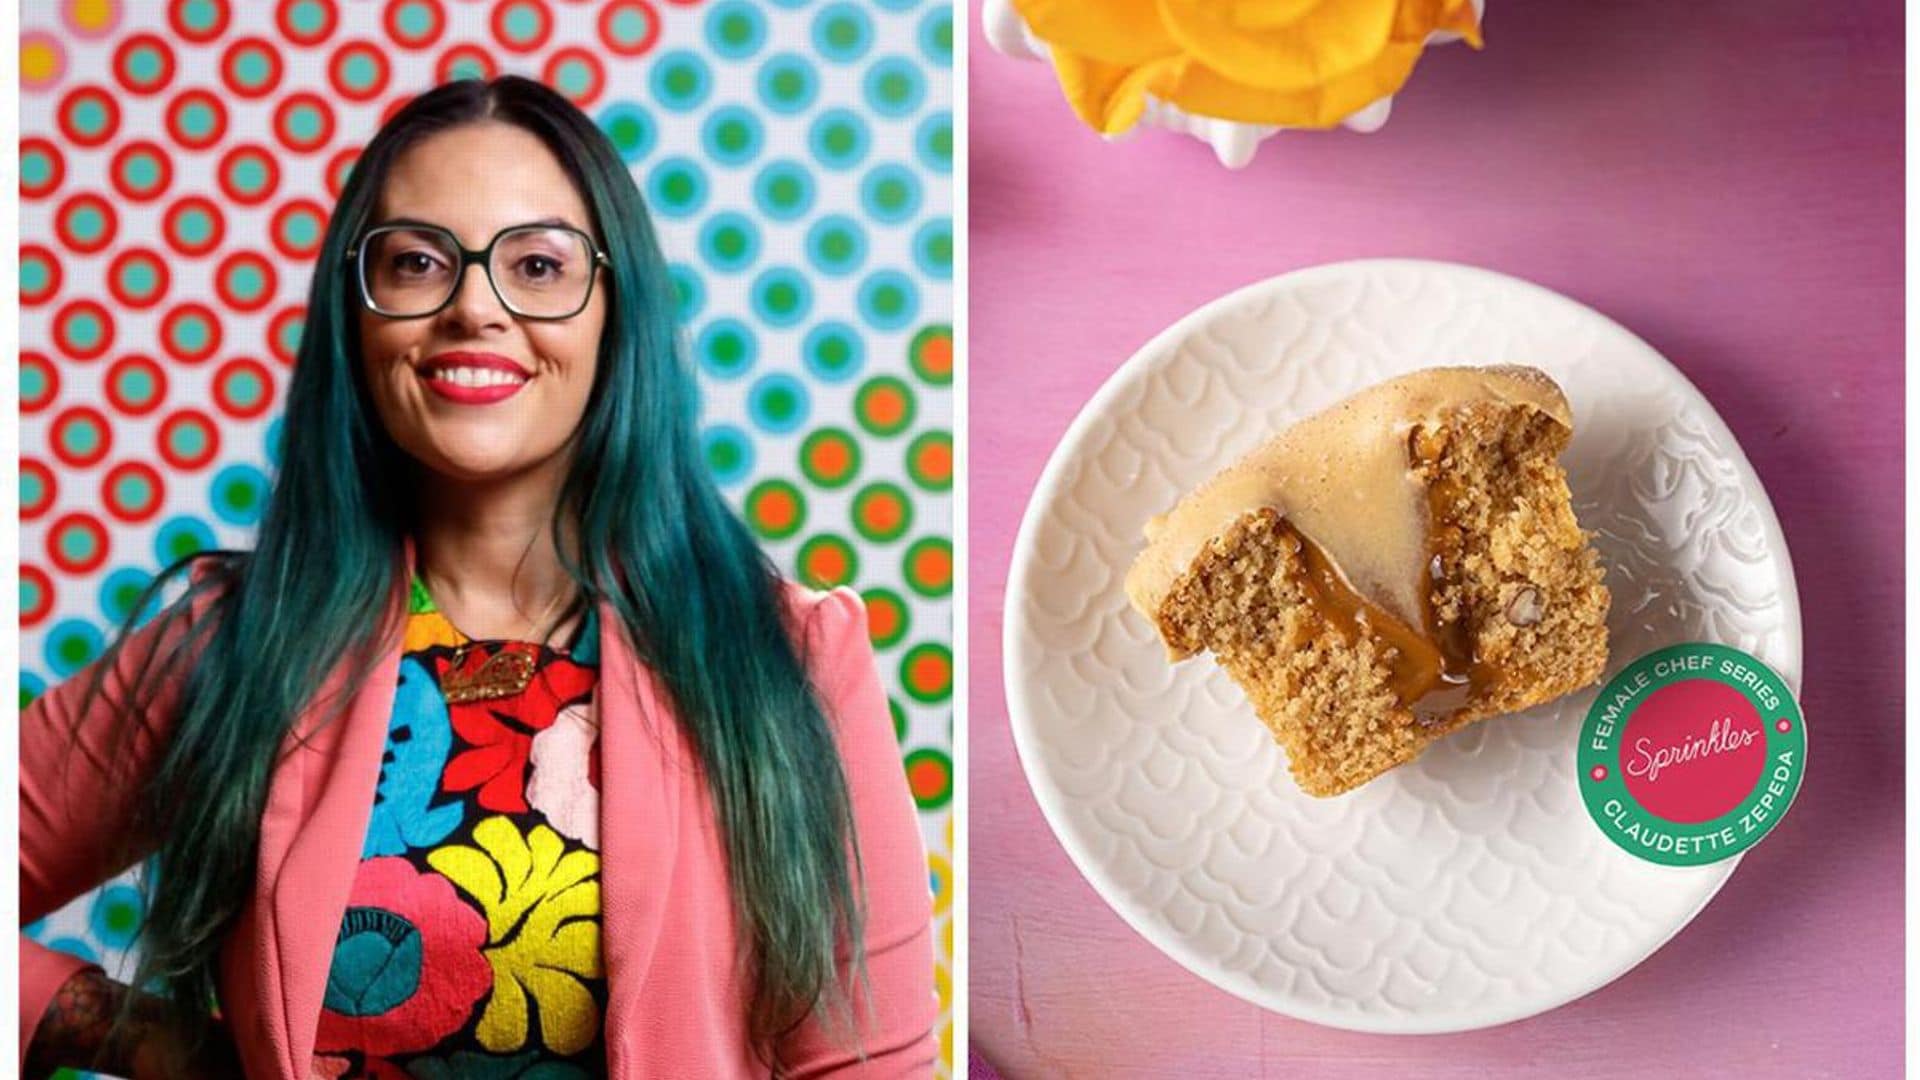 Celebrity Chef Claudette Zepeda teams up with Sprinkles bakery chain to create a special cupcake for National Hispanic Heritage Month